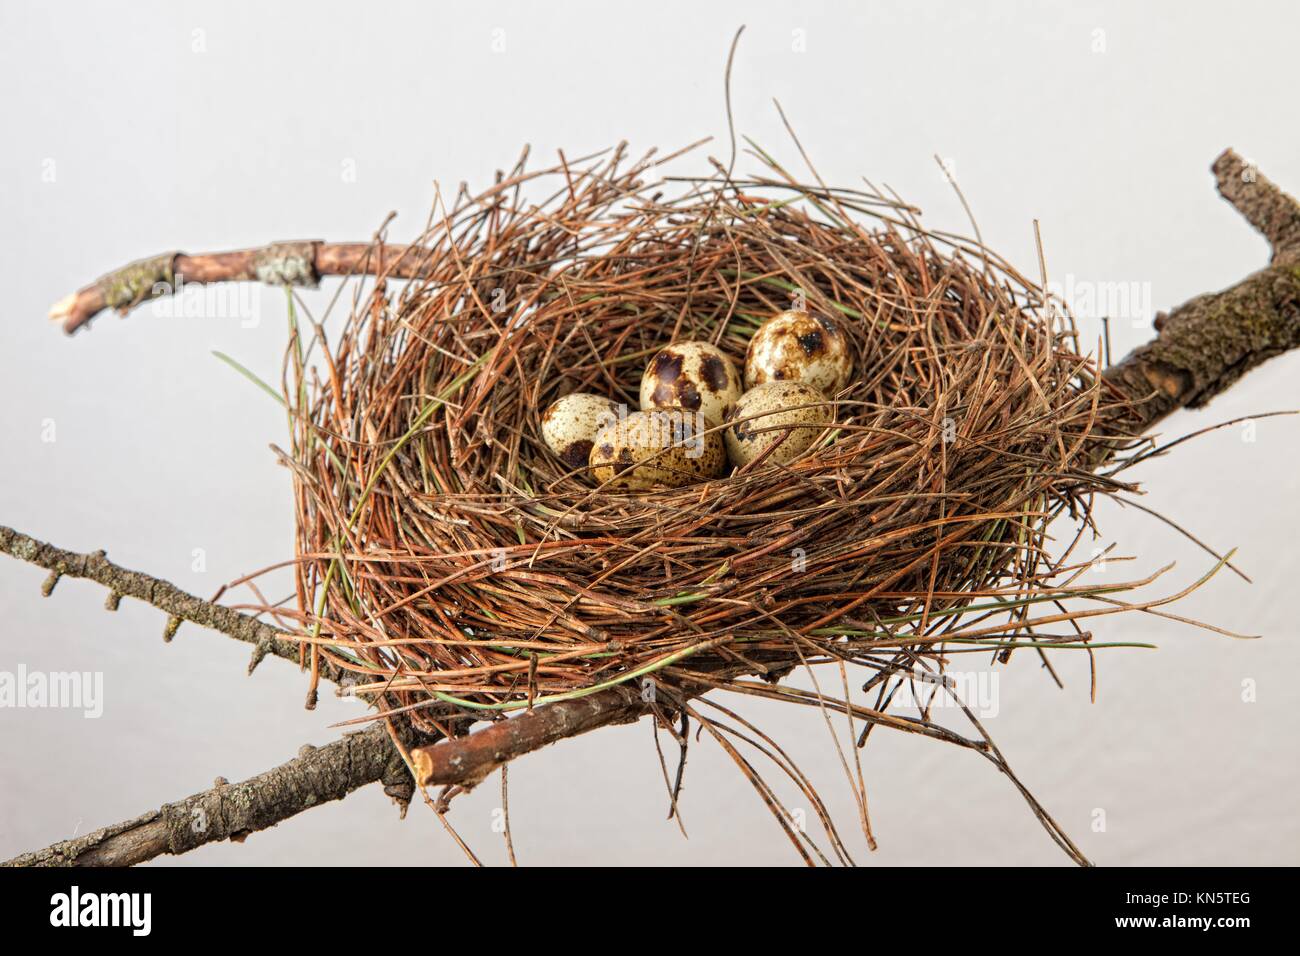 Bird nest made of pine tree needles with quail eggs. Isolated over white background and placed over tree branch. Stock Photo